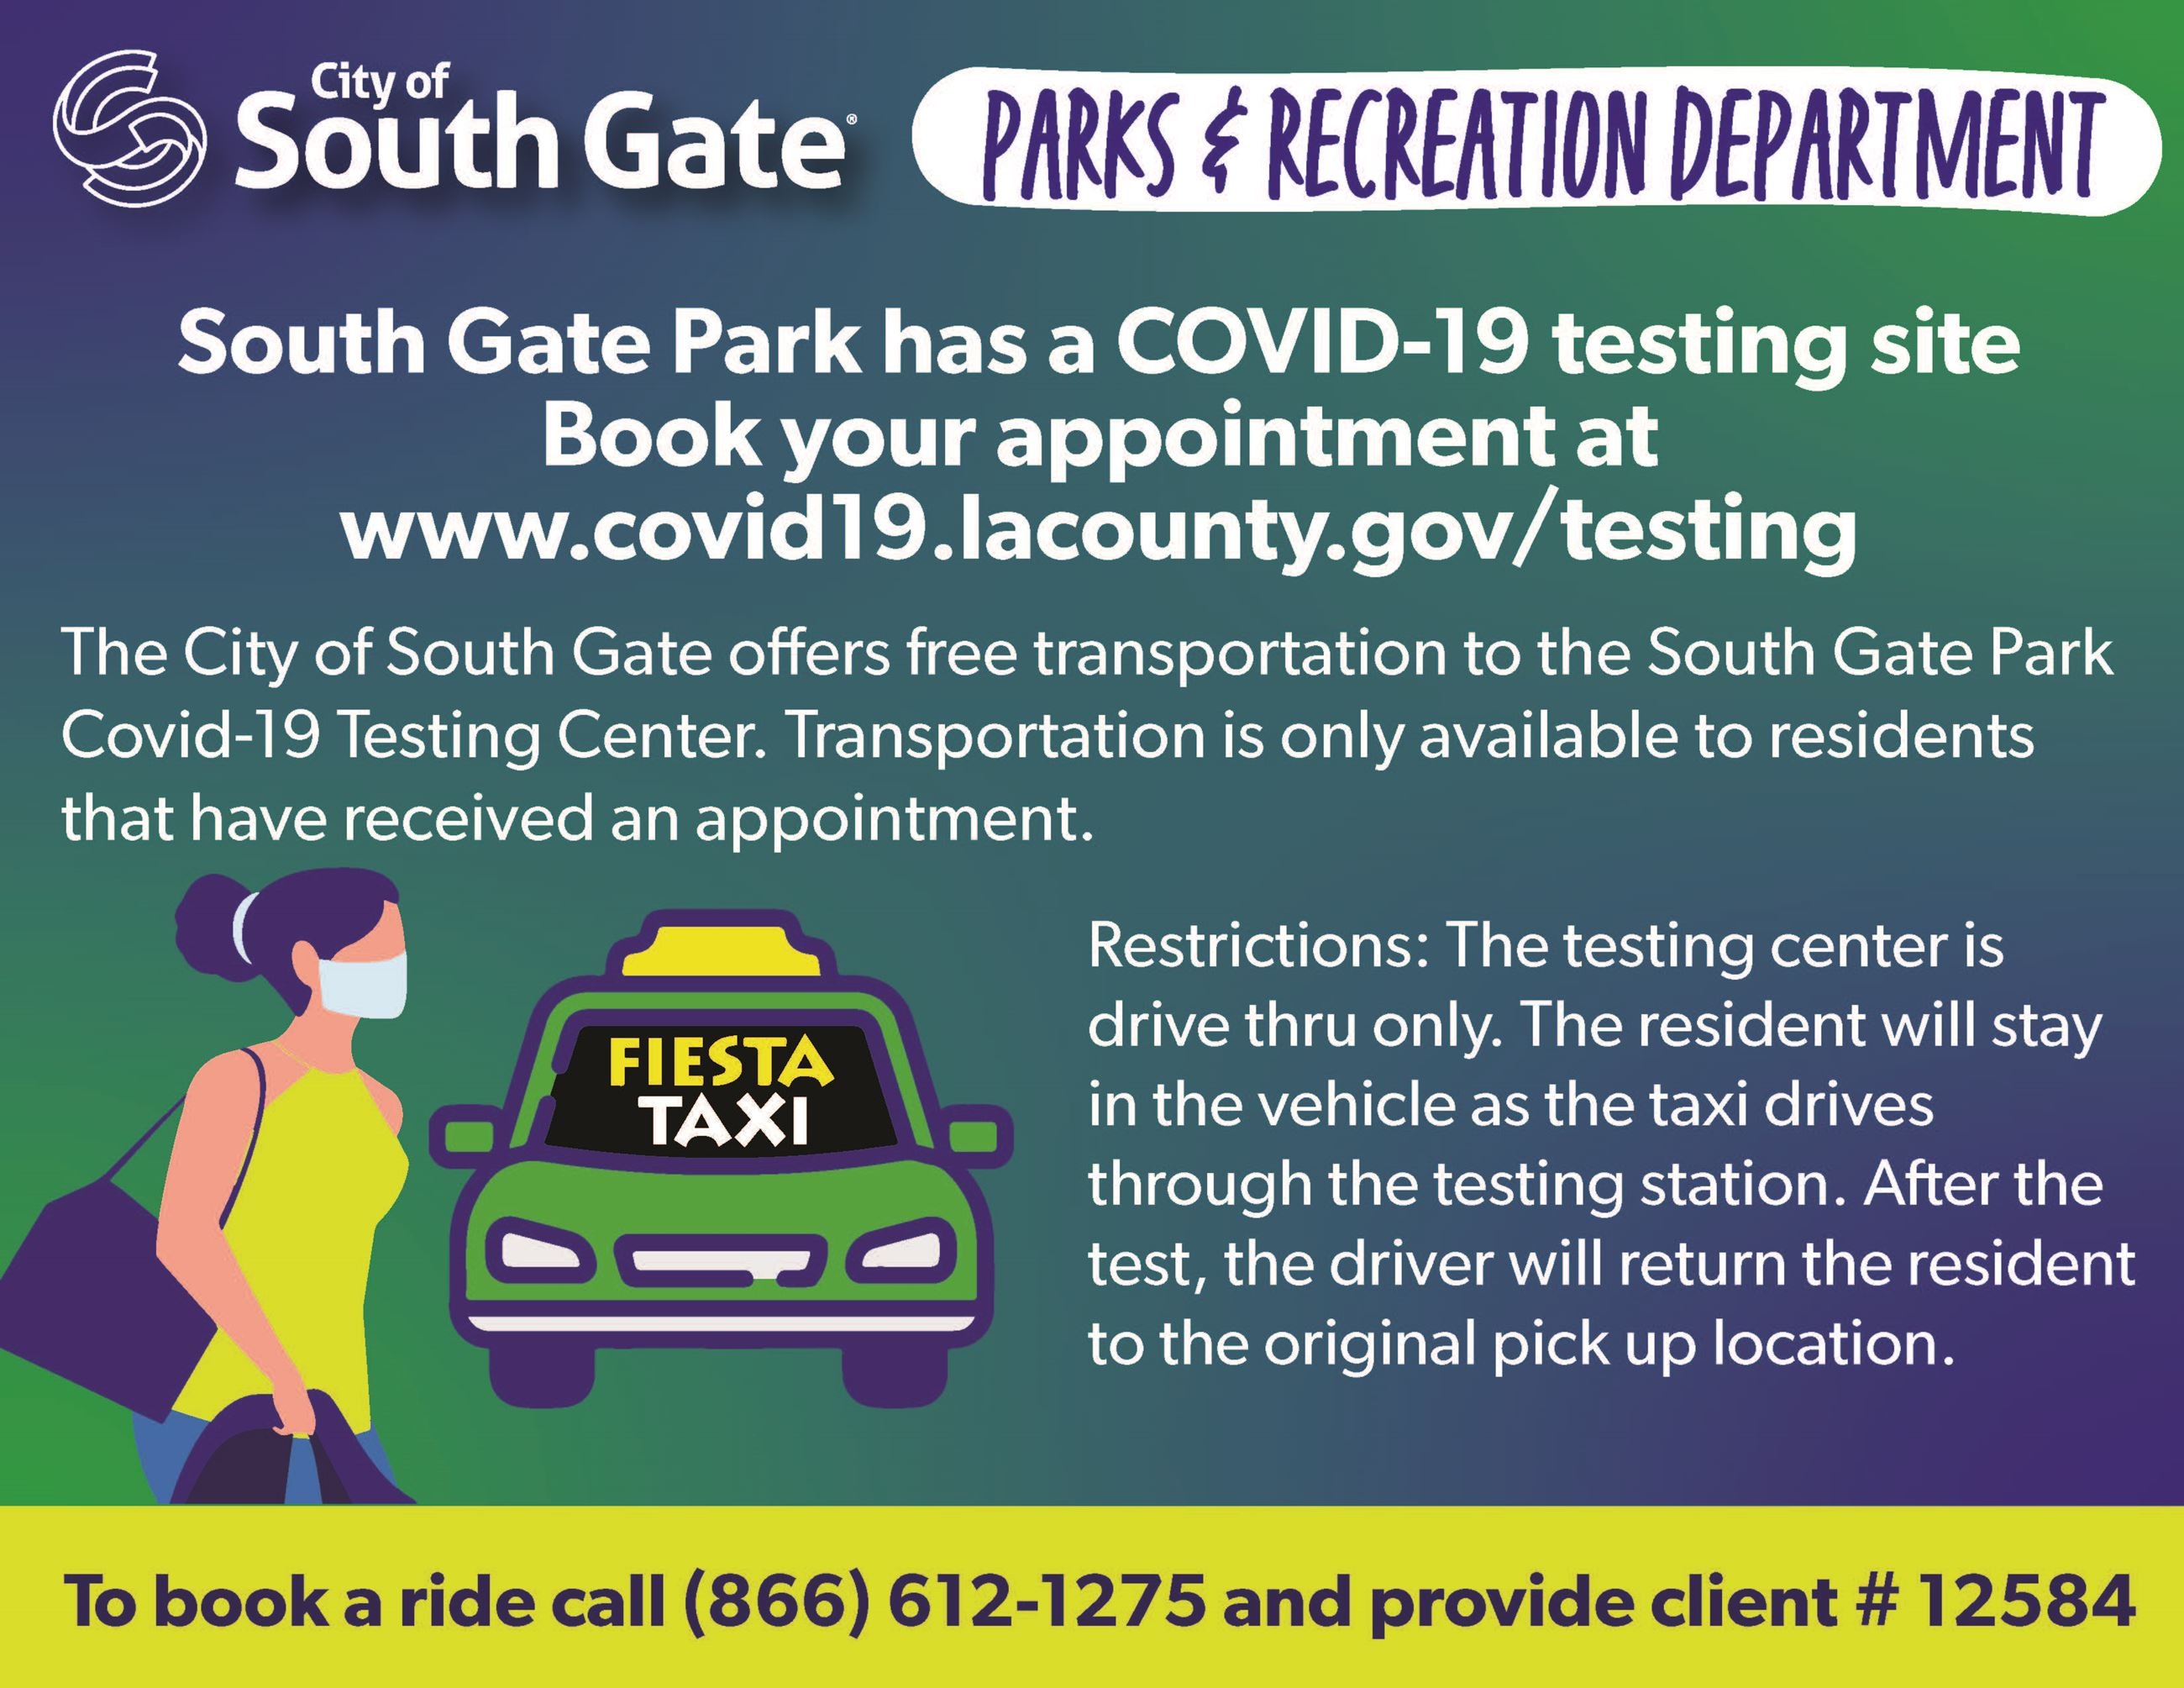 Covid testing booking information in SpanishCovid testing booking information